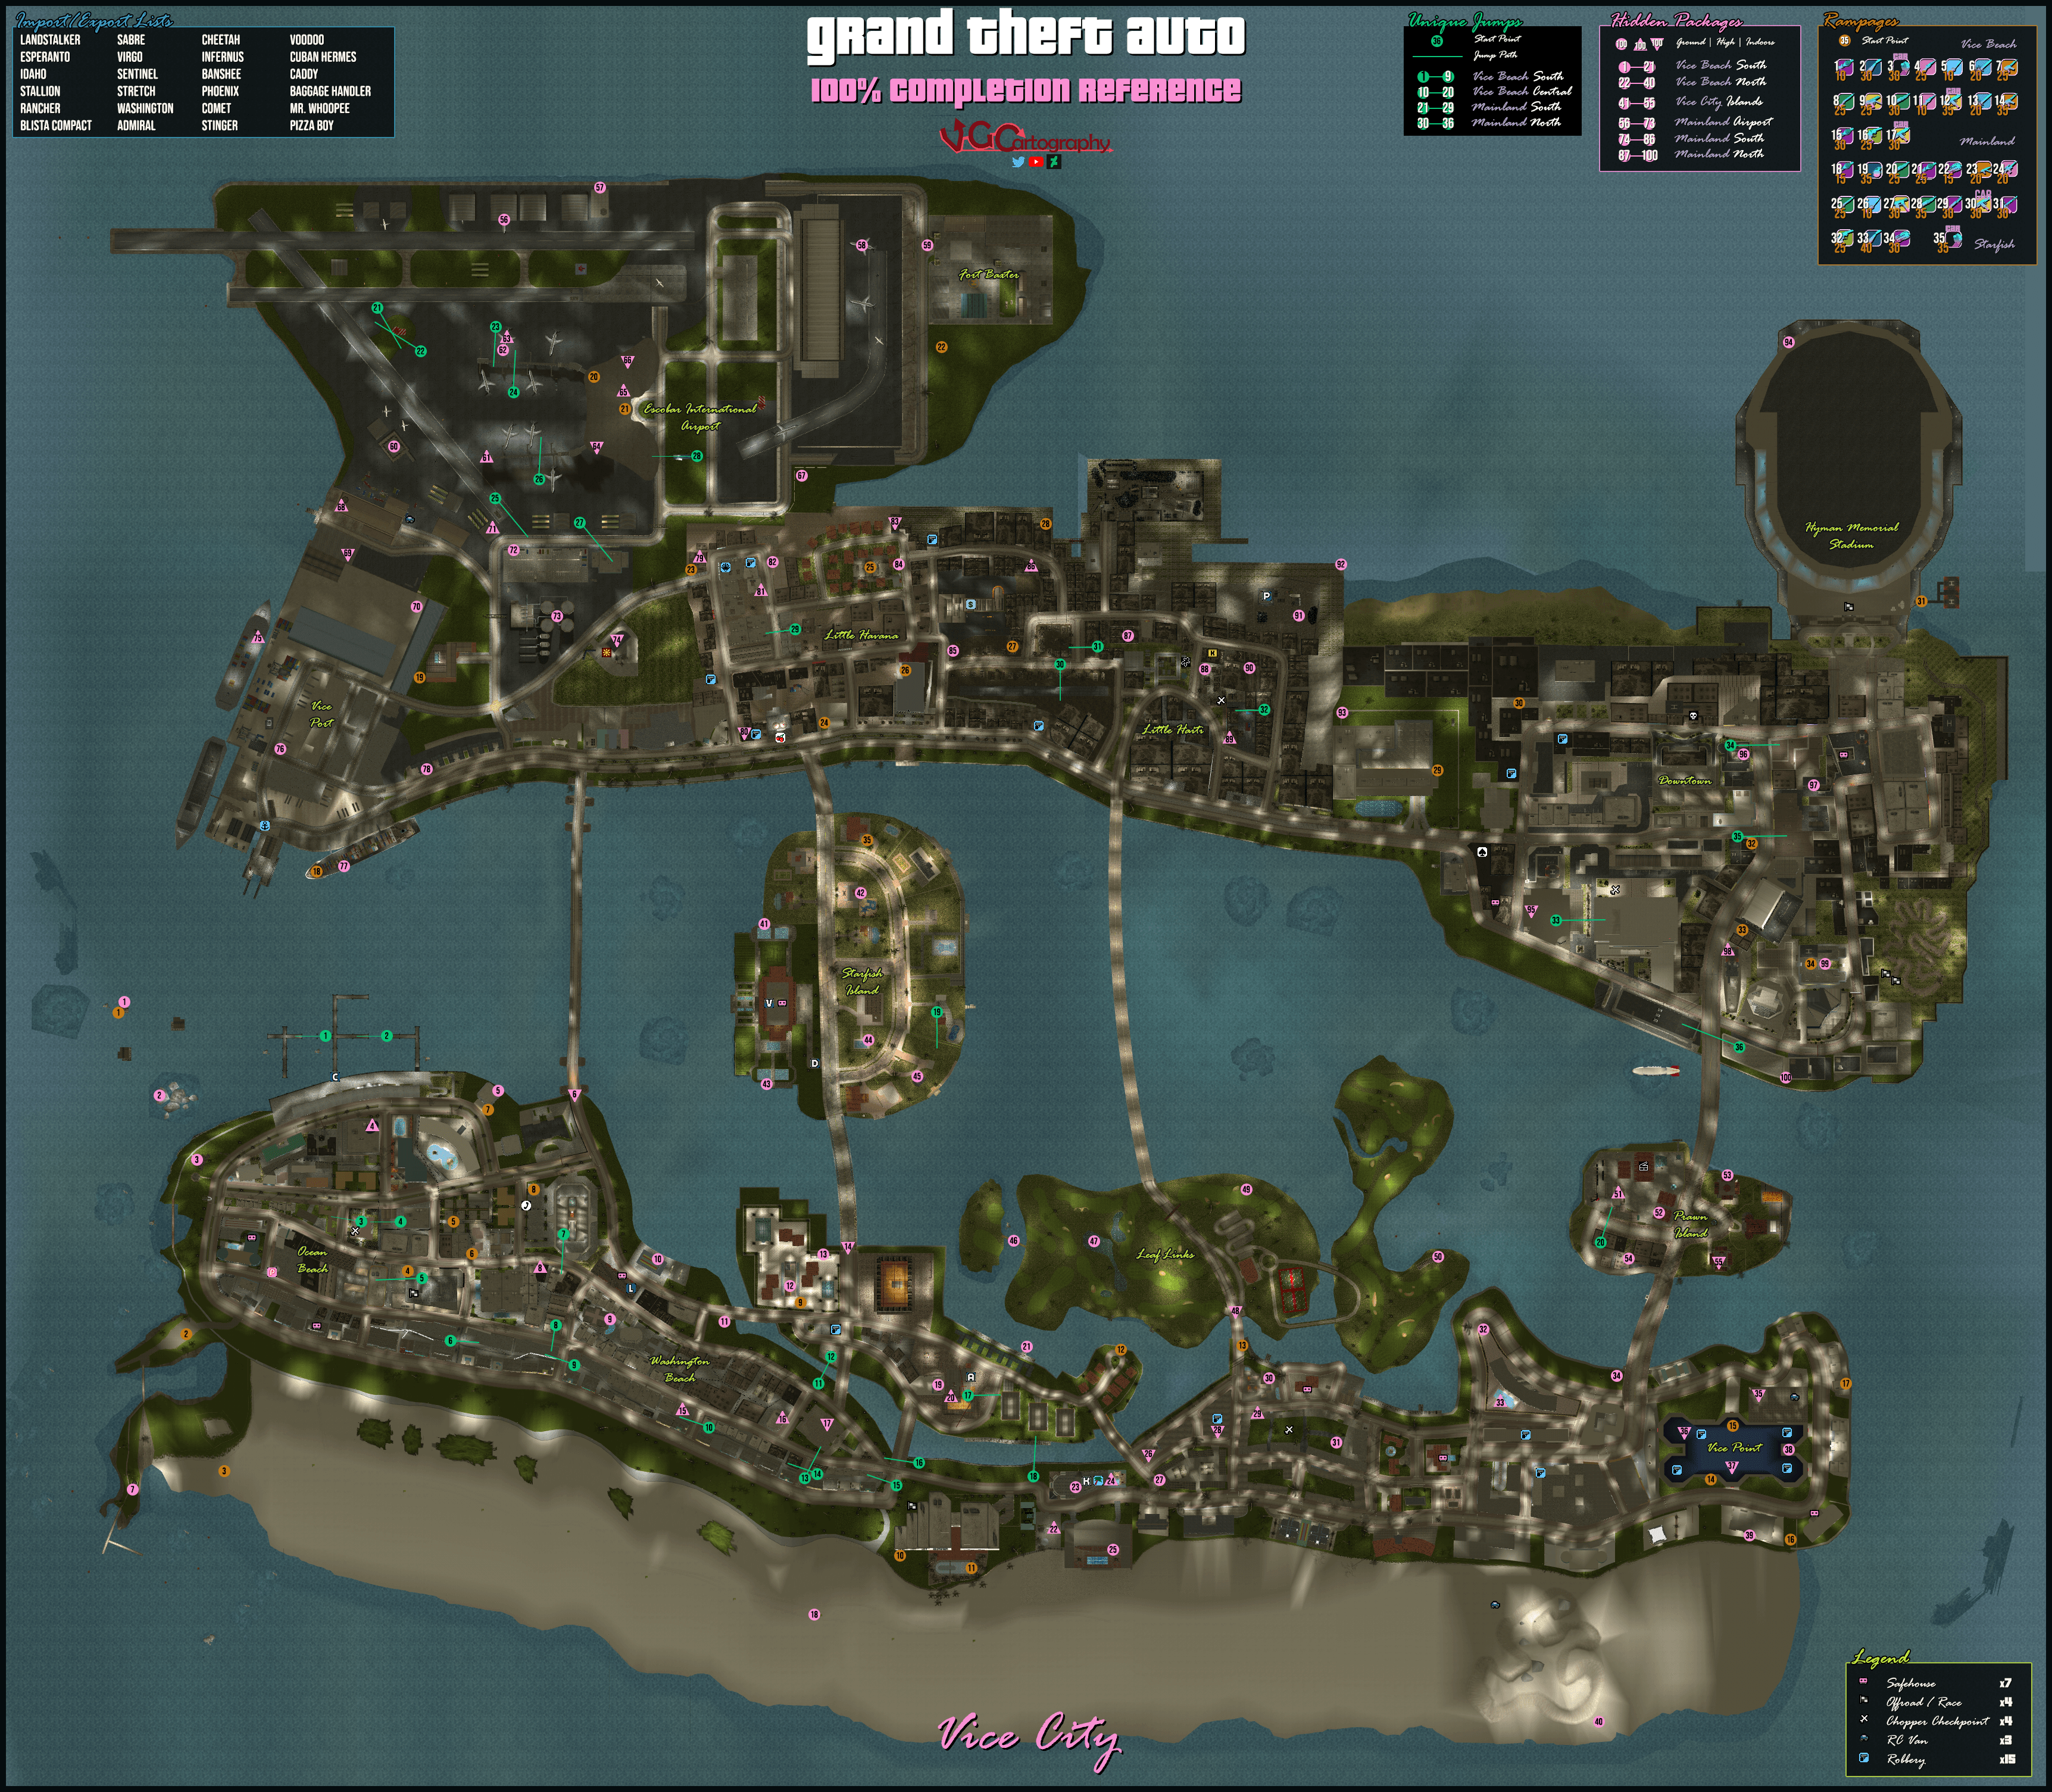 Grand Theft Auto: Vice City Interactive Maps and Locations - IGN